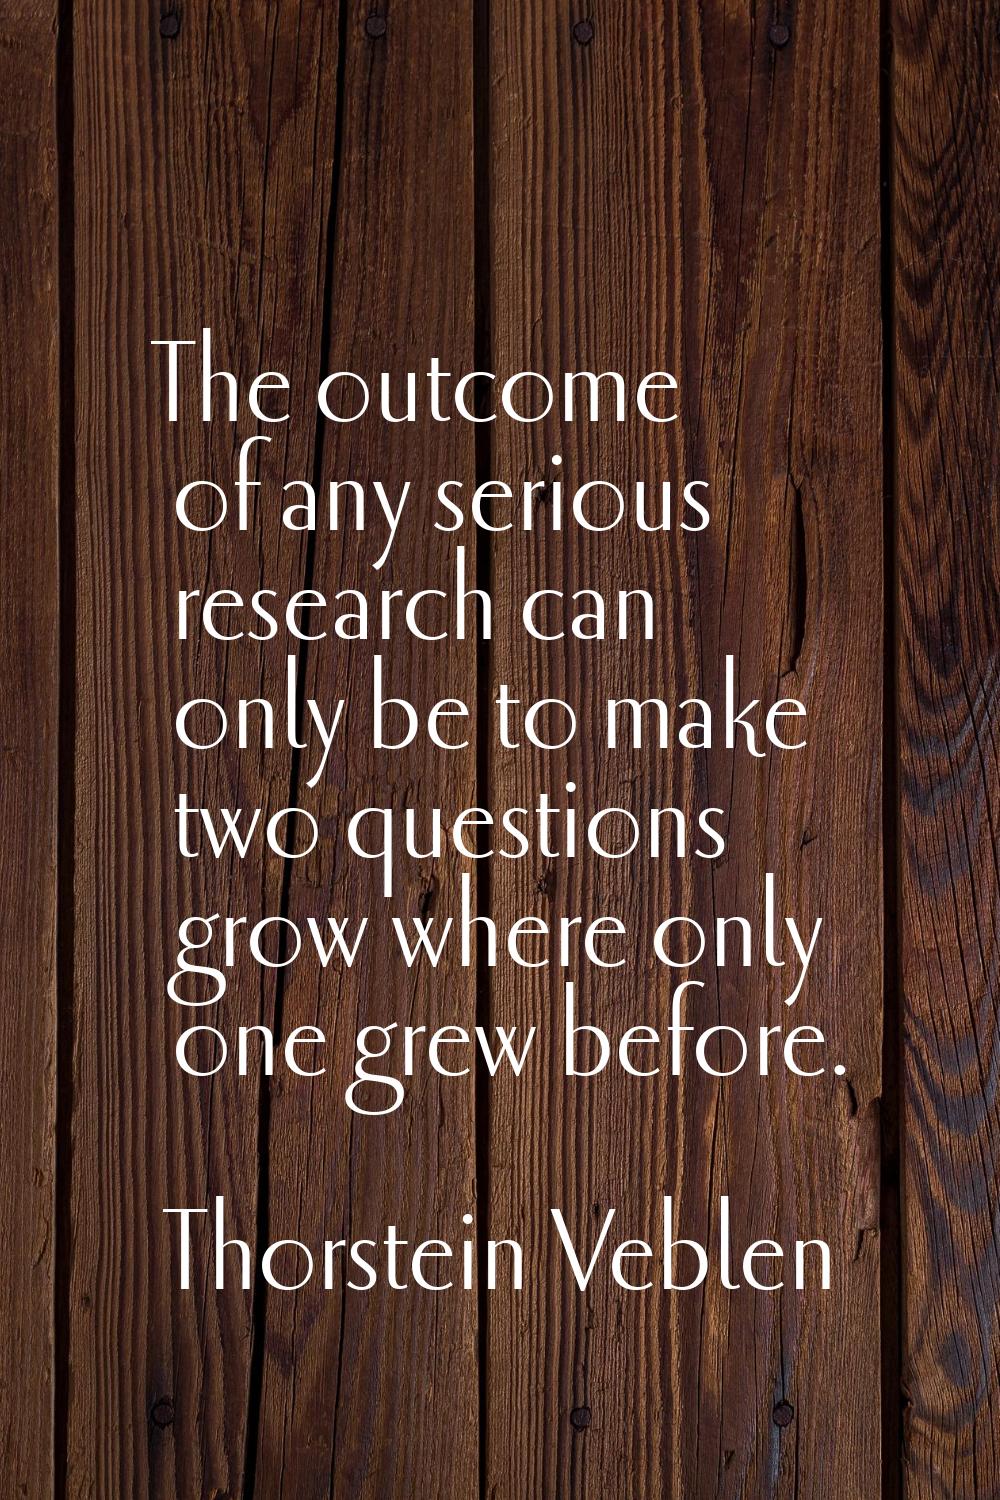 The outcome of any serious research can only be to make two questions grow where only one grew befo